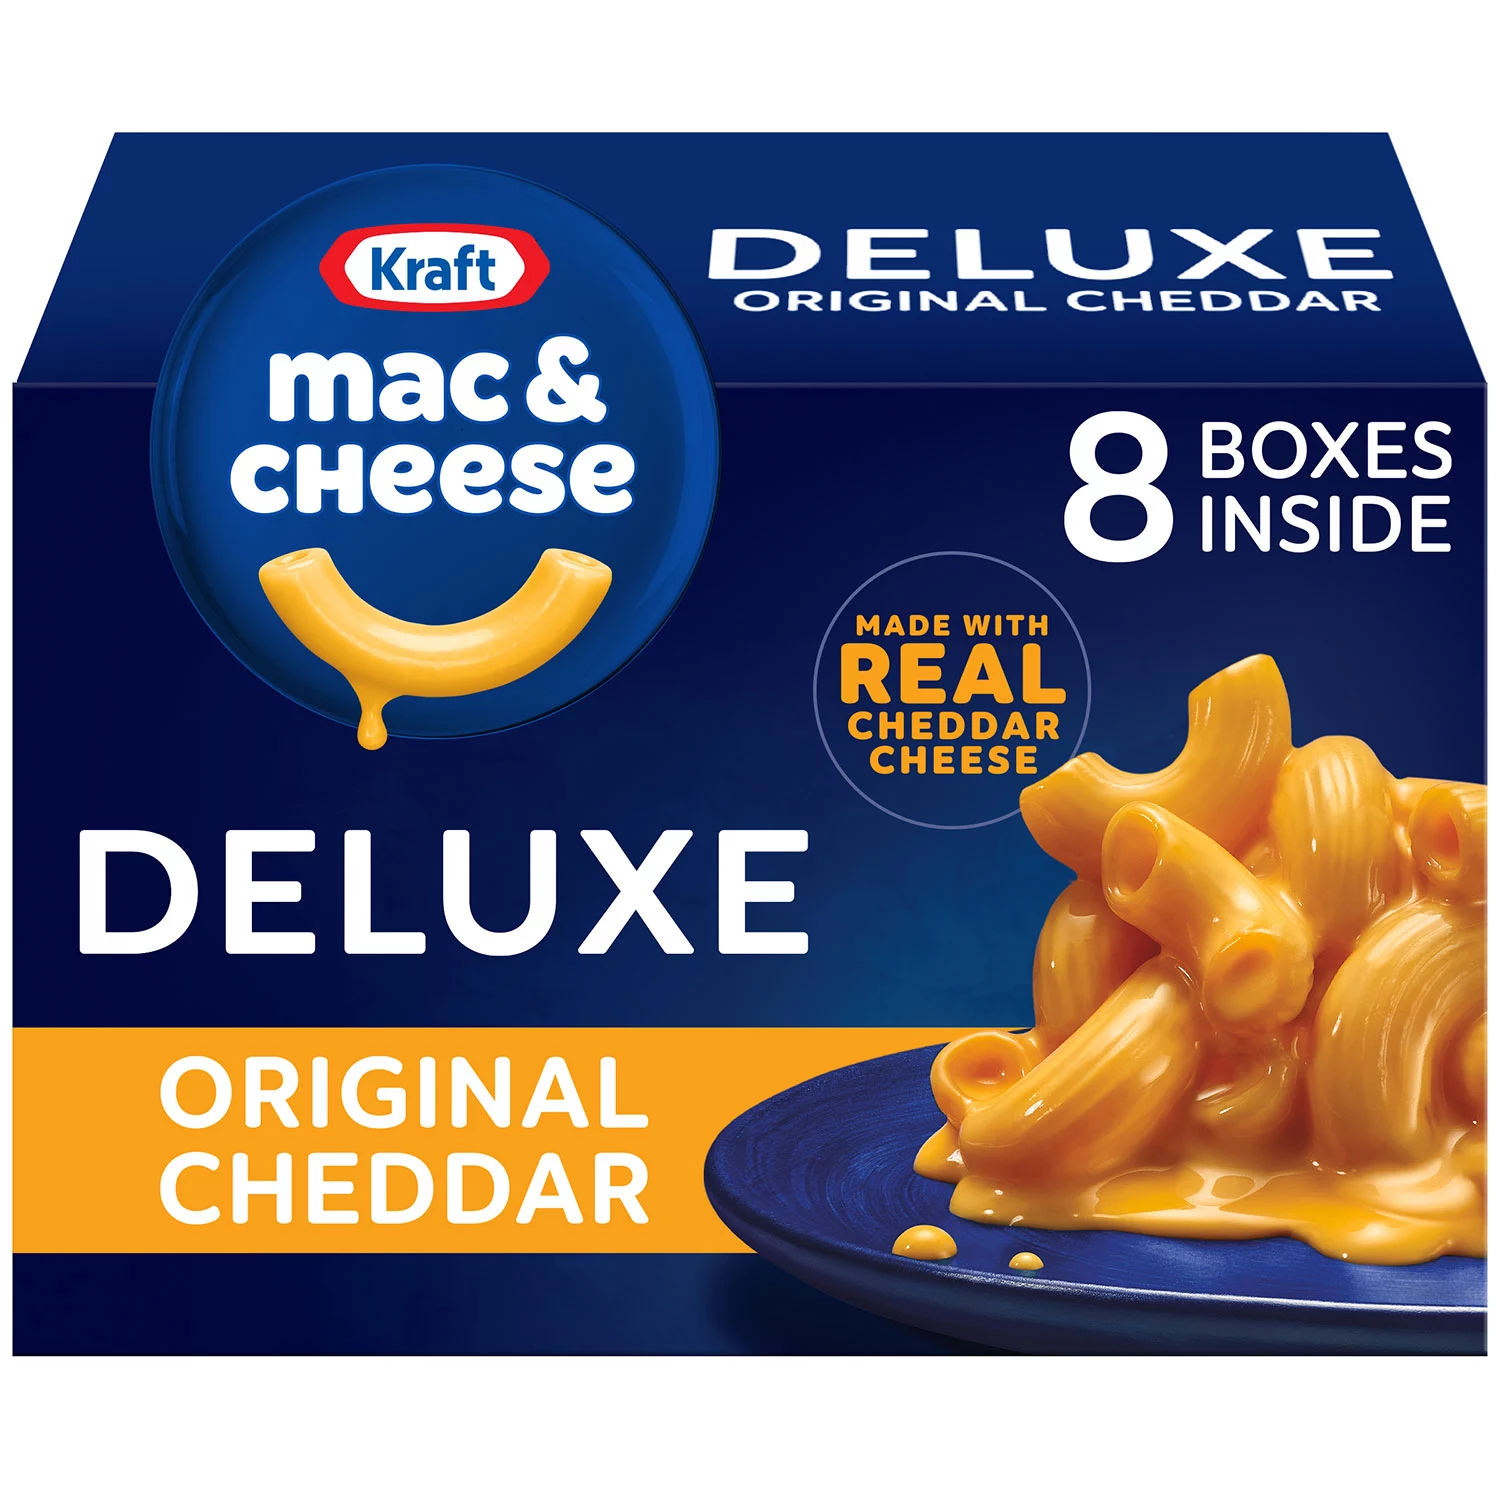 Kraft Deluxe Original Cheddar Macaroni and Cheese Dinner